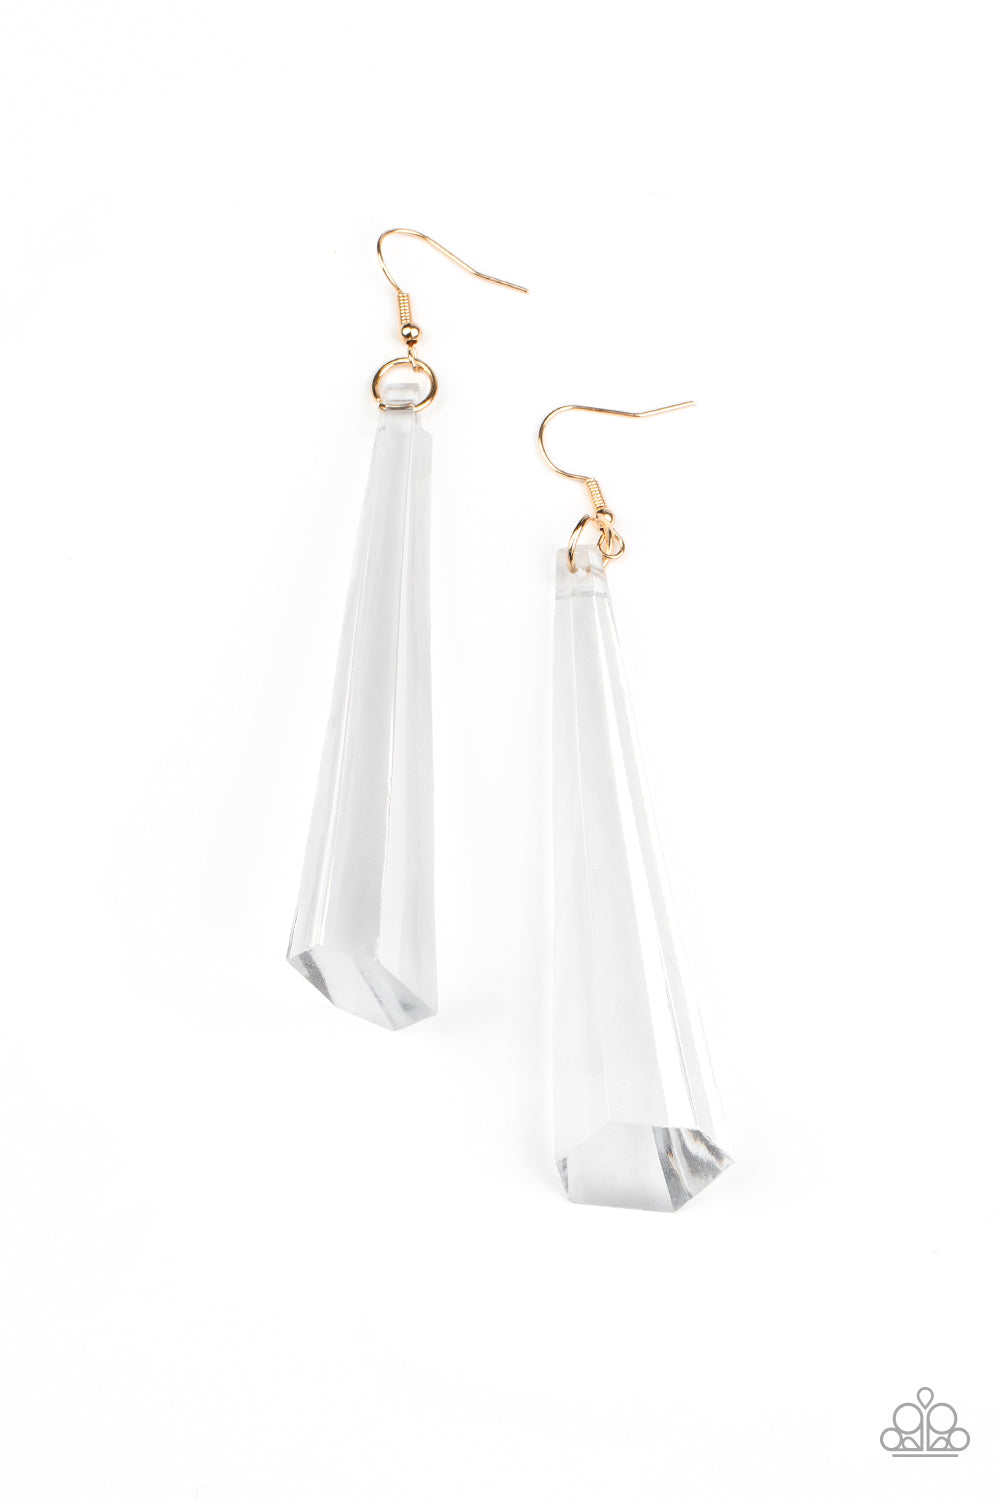 Paparazzi Accessories Break the Ice - Gold Earrings - Lady T Accessories